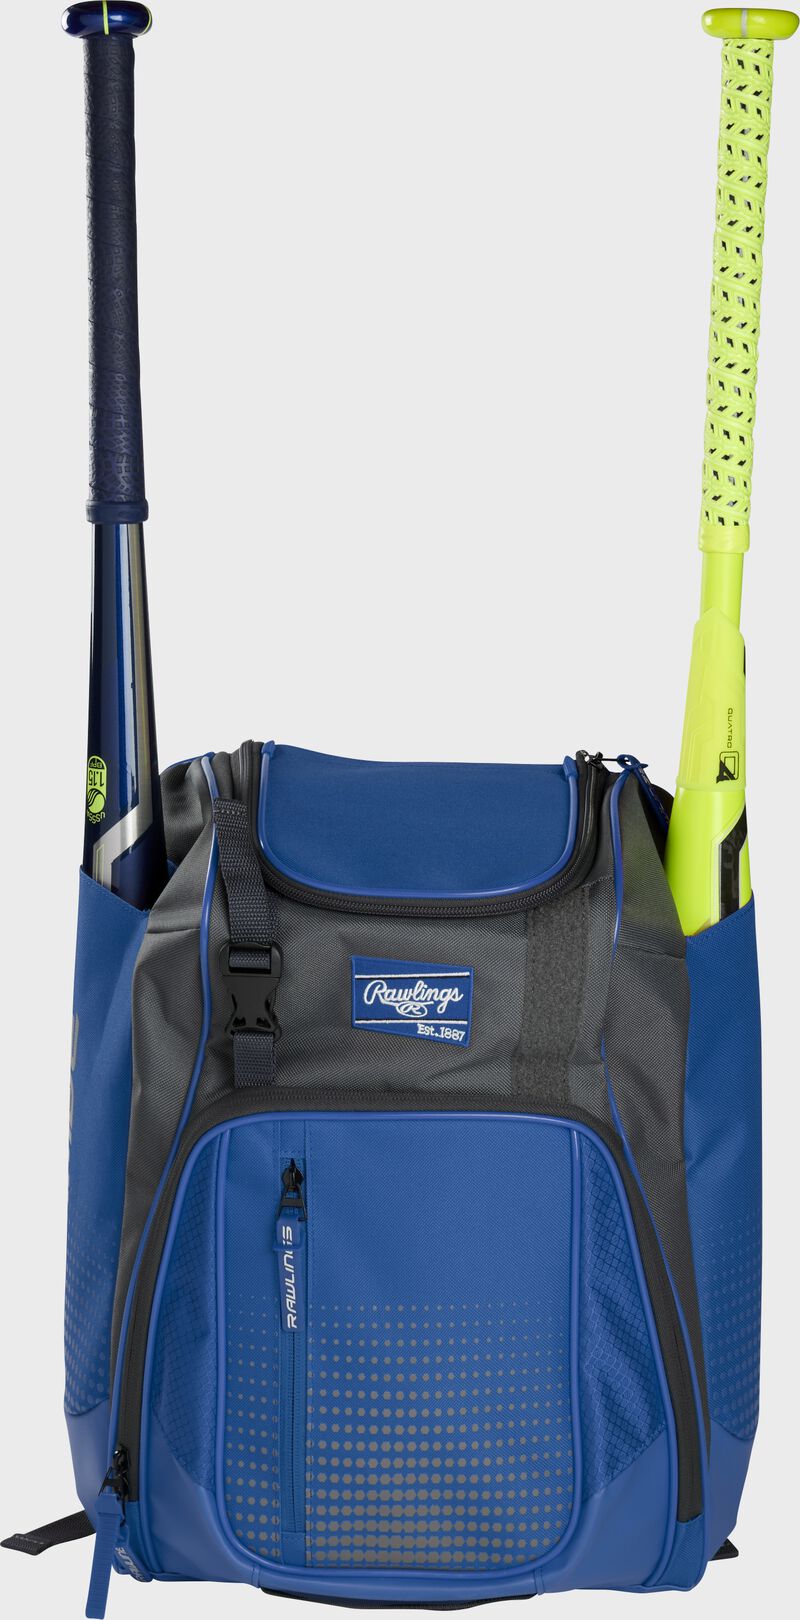 Rawlings Franchise Baseball Backpack-Rawlings-Sports Replay - Sports Excellence